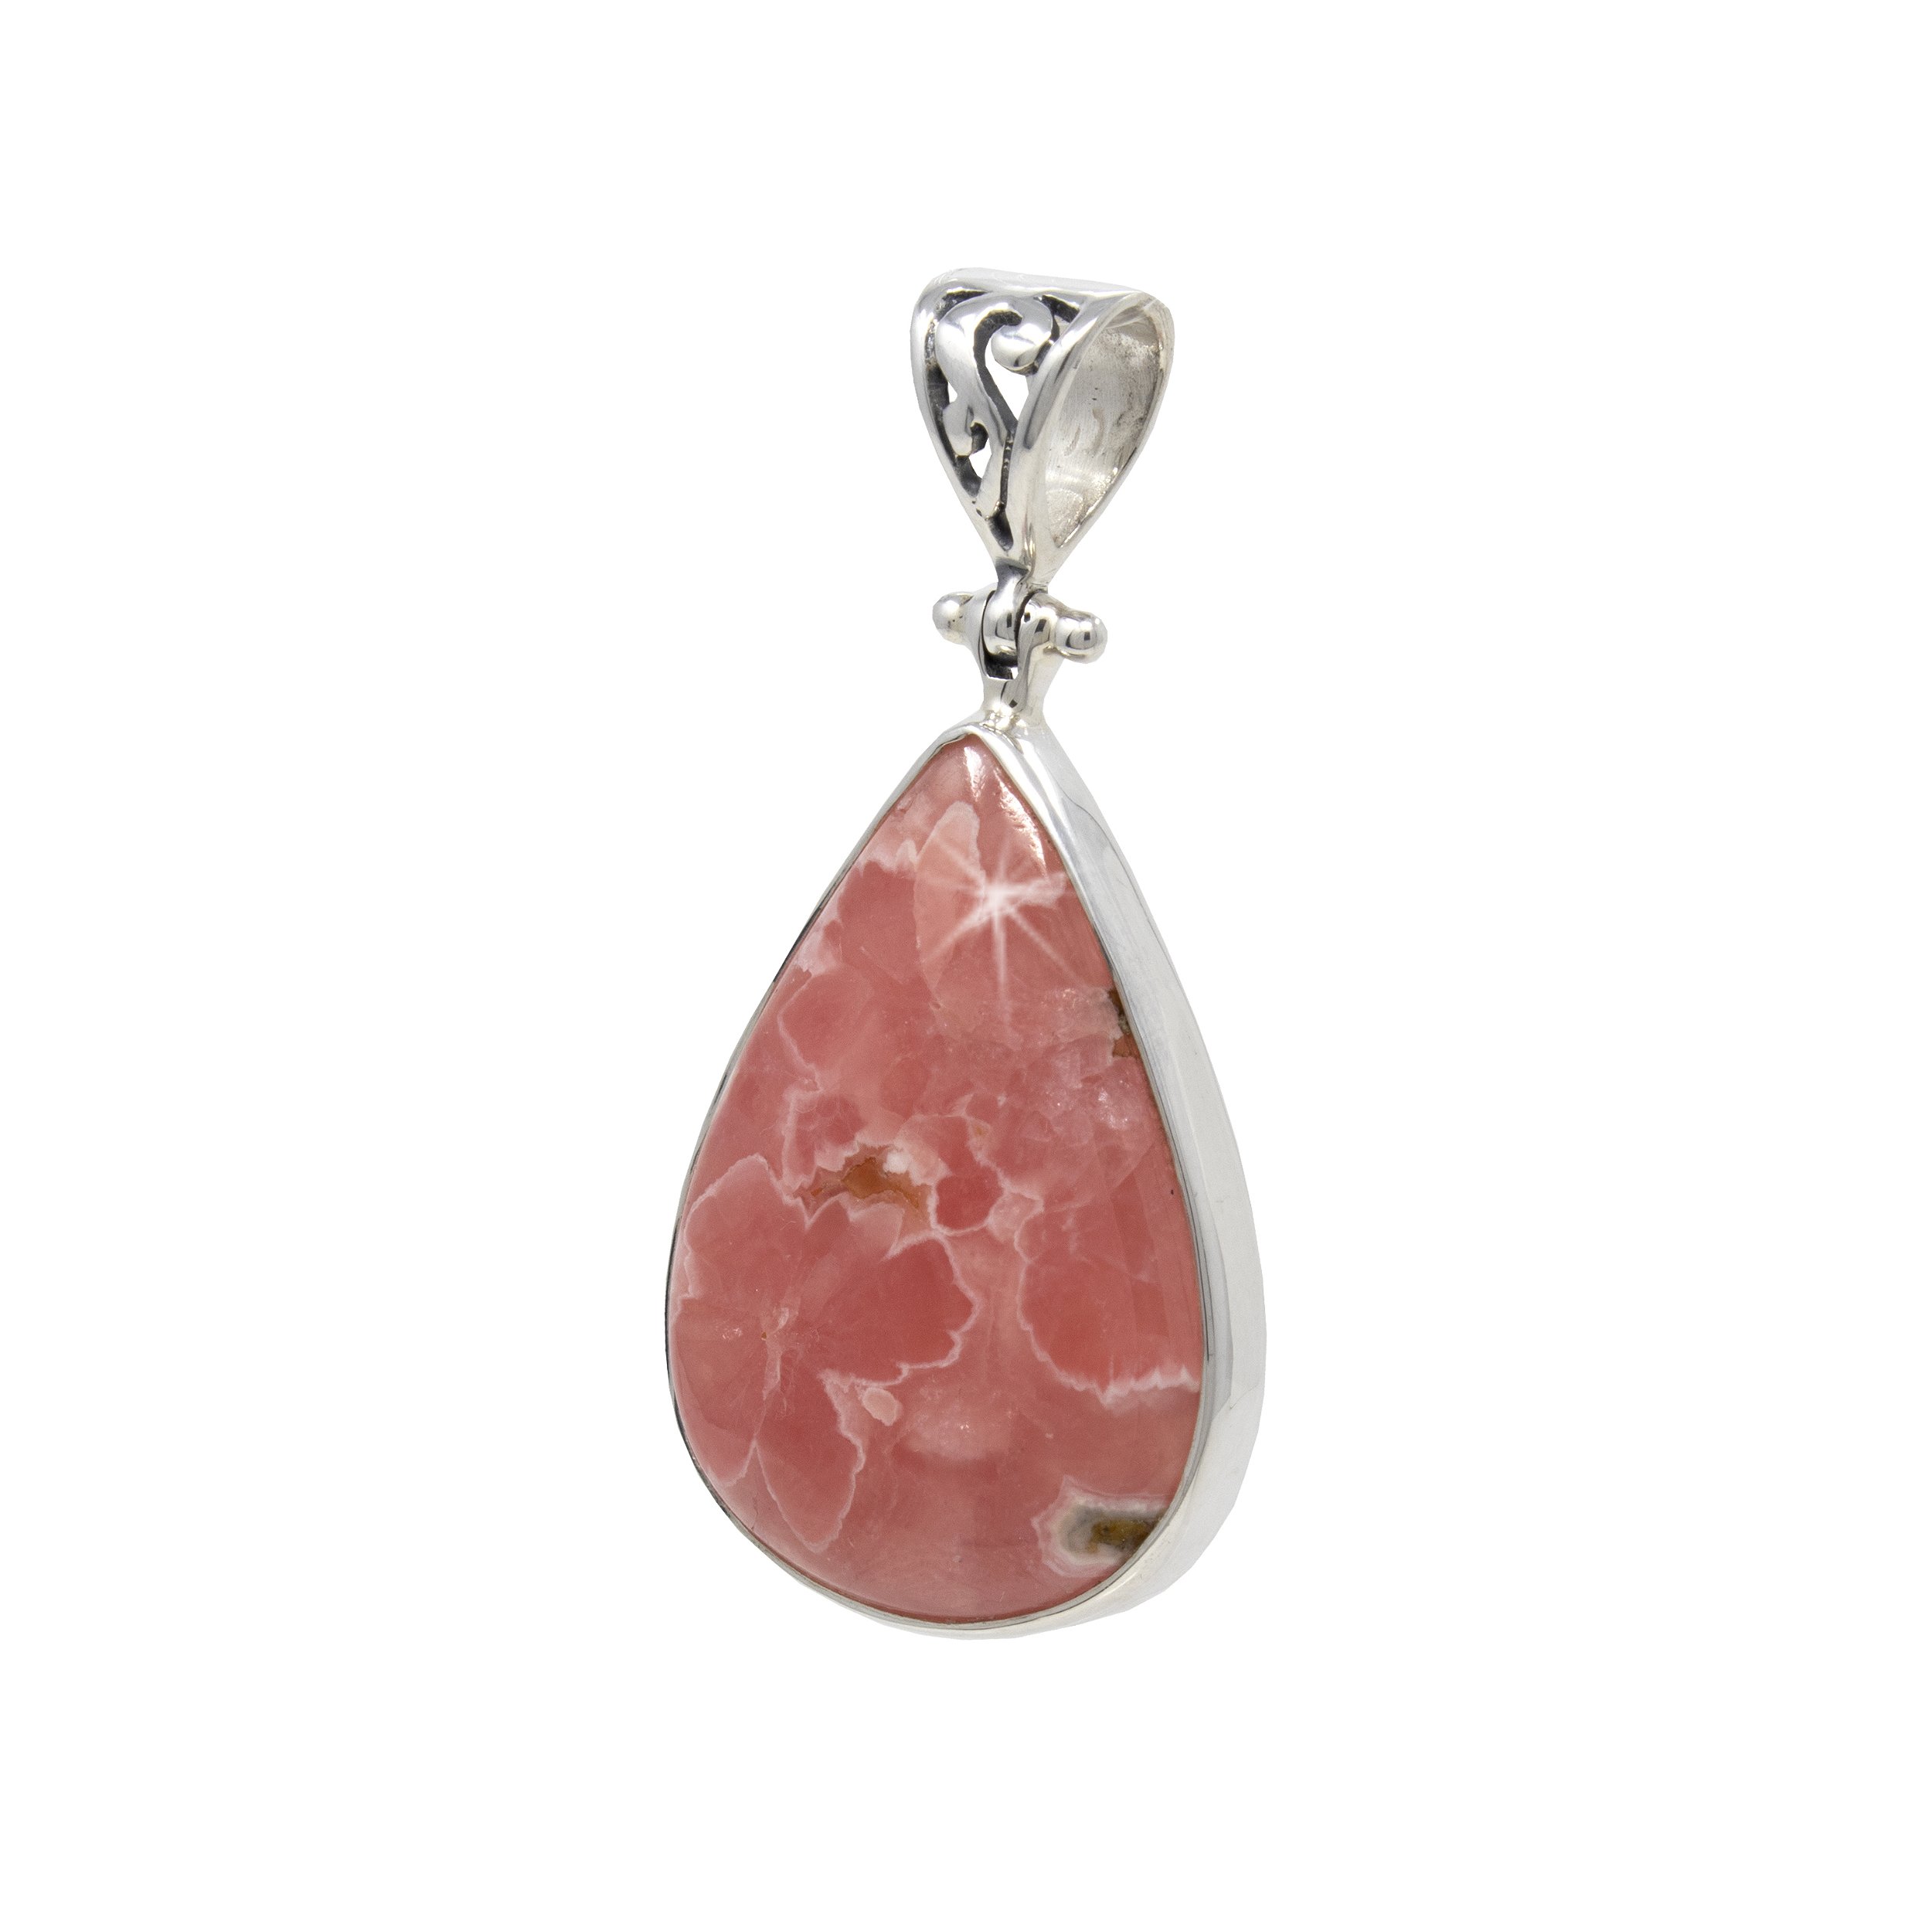 Rhodochrosite Pendant - Pear Cabochon With Simple Silver Bezel & Ornate Bail - Rich Gem Quality With Flower-like Pattern Bursts